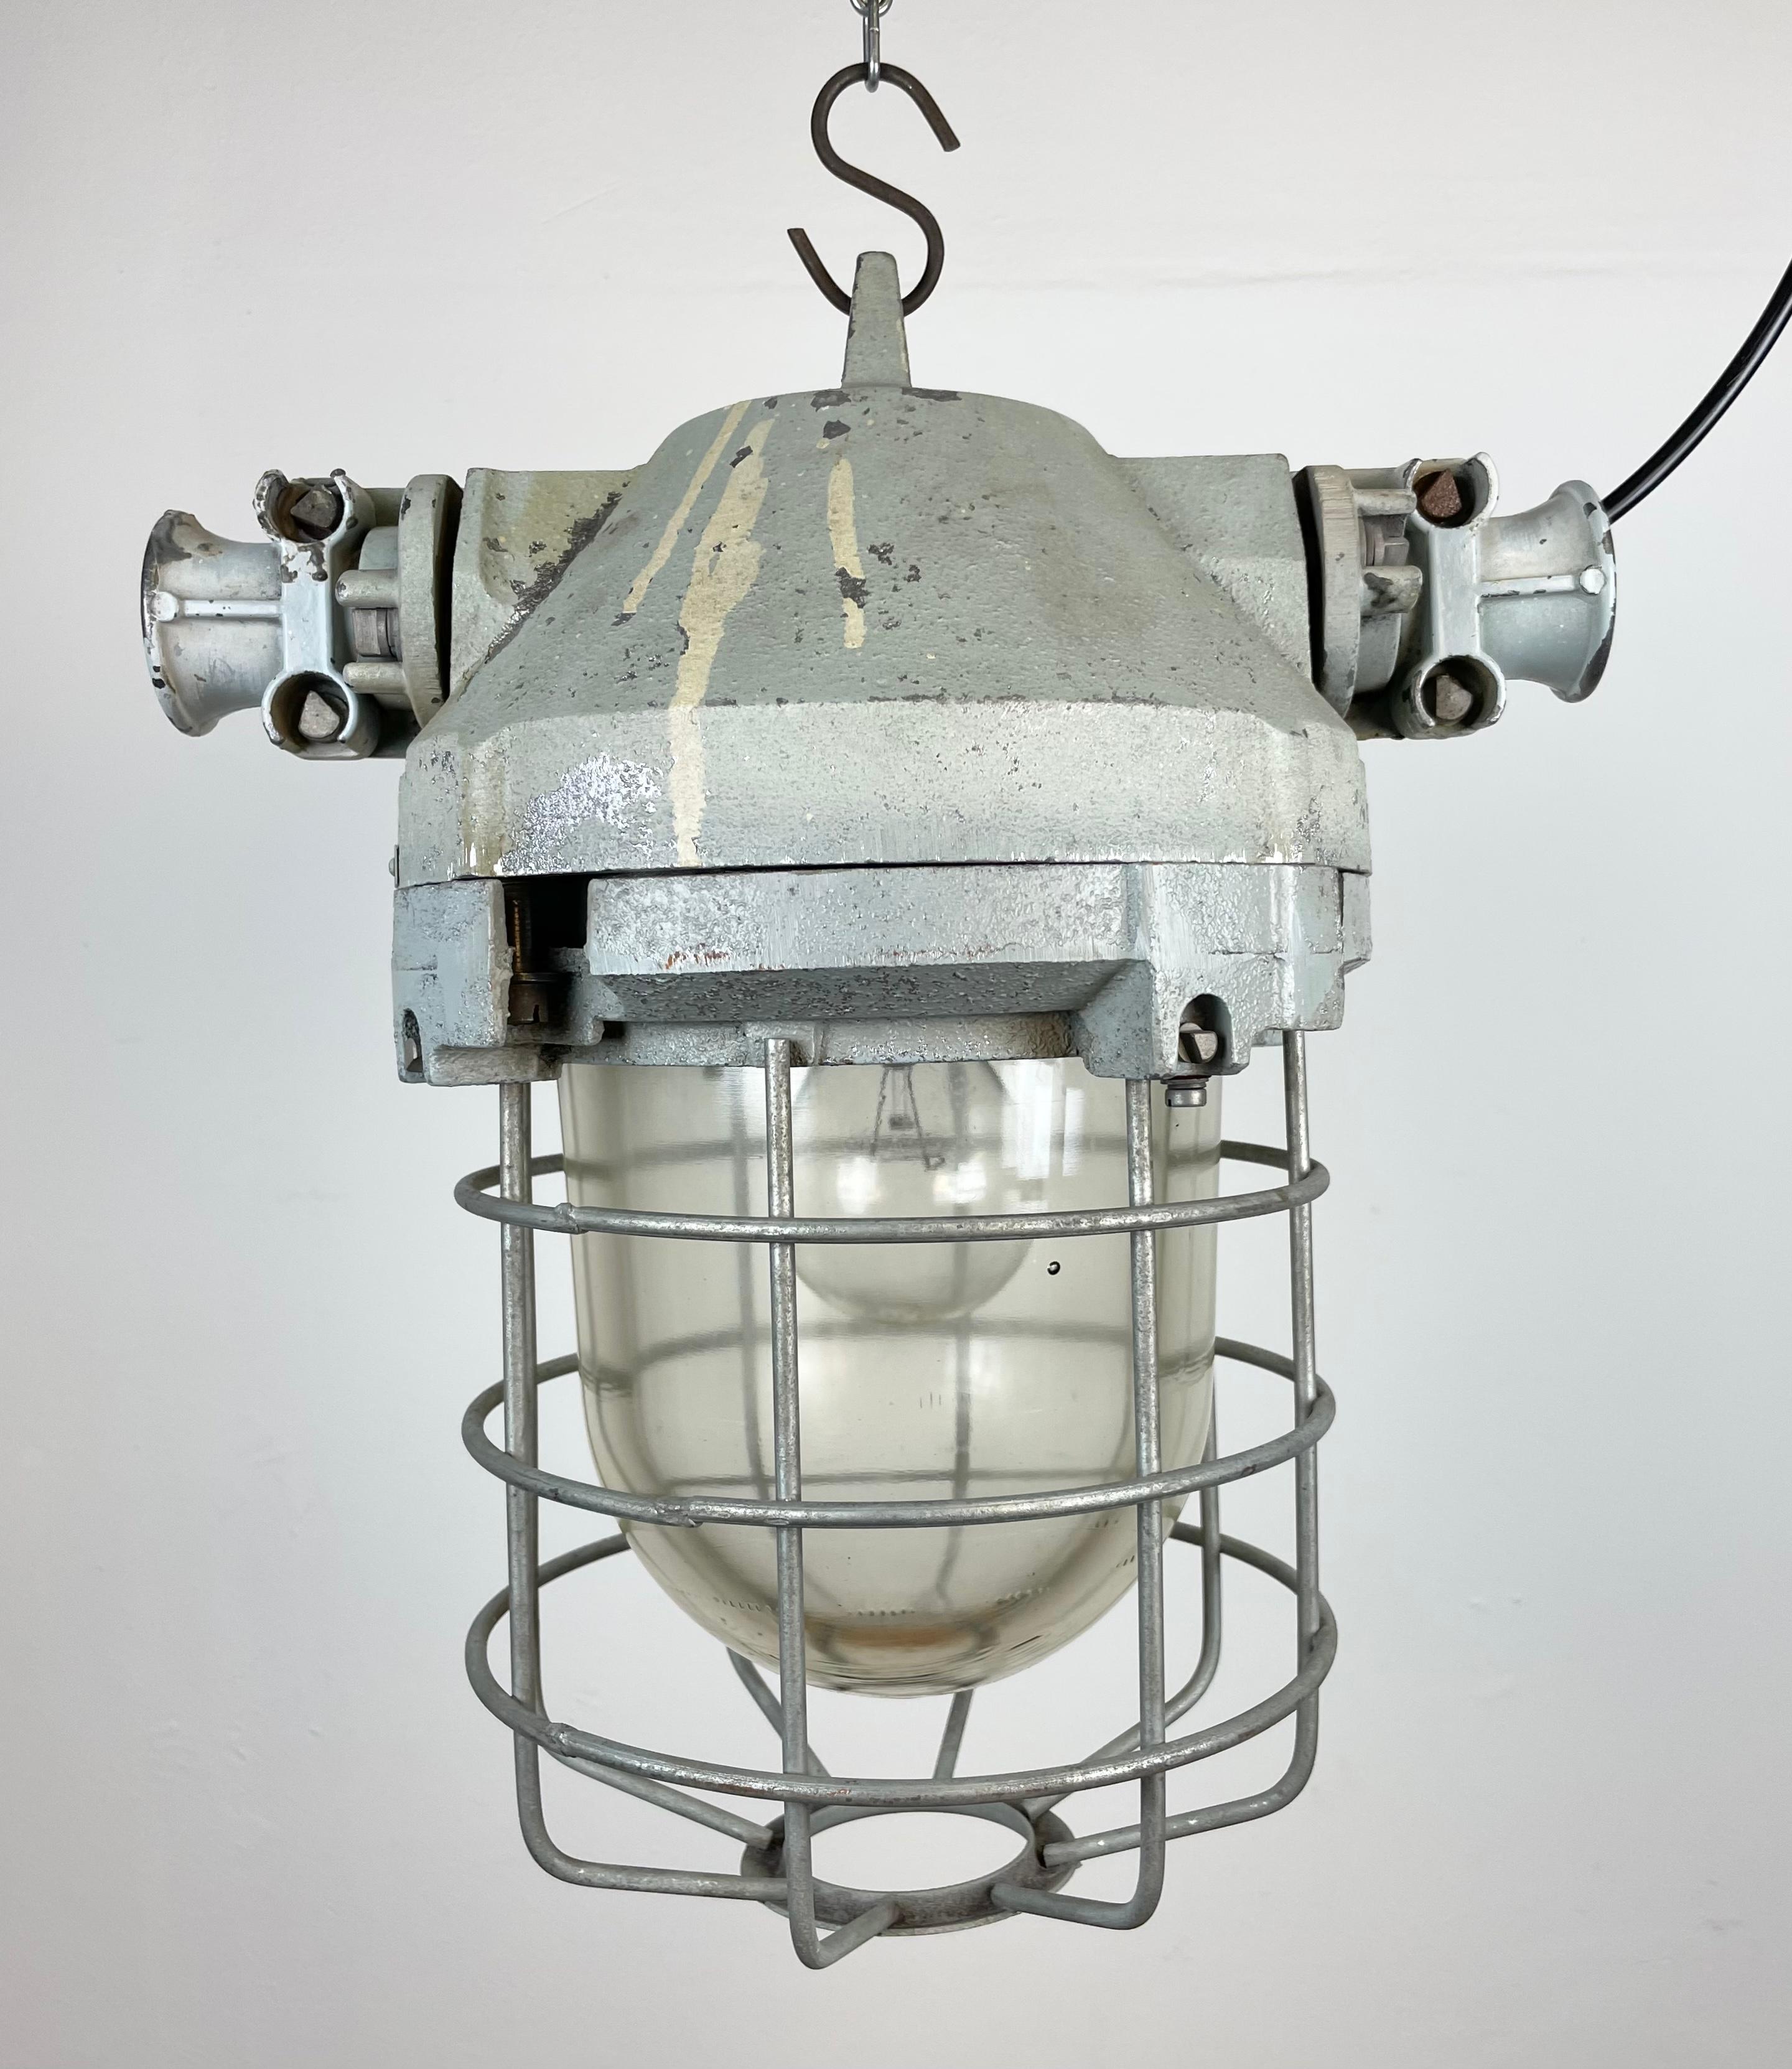 Czech Industrial Bunker Ceiling Light with Iron Cage from Elektrosvit, 1970s For Sale